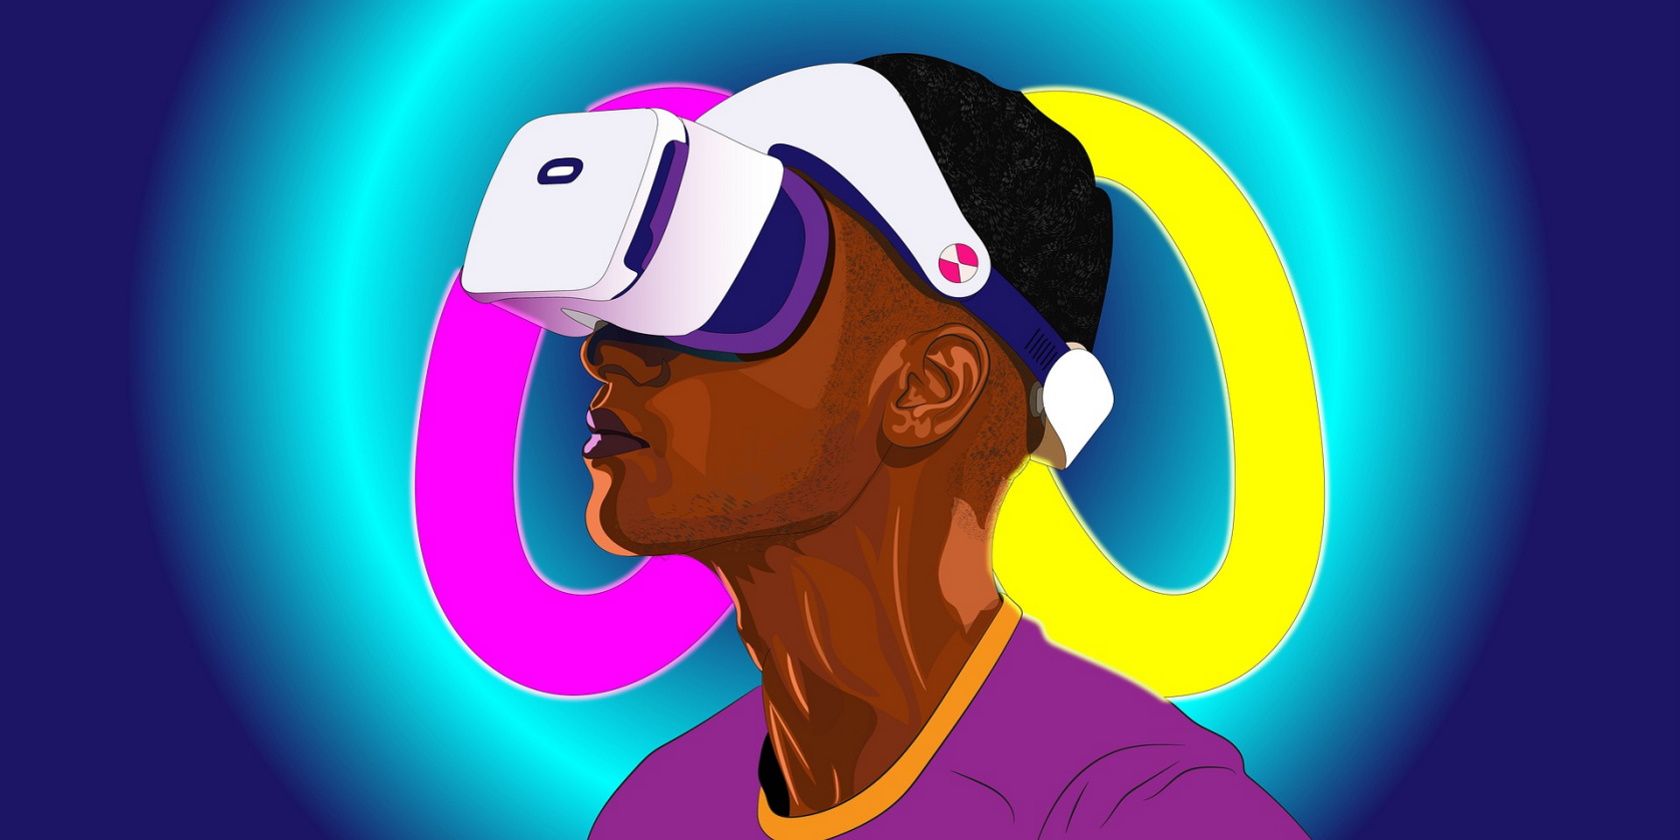 an illustration of a man wearing a VR headset